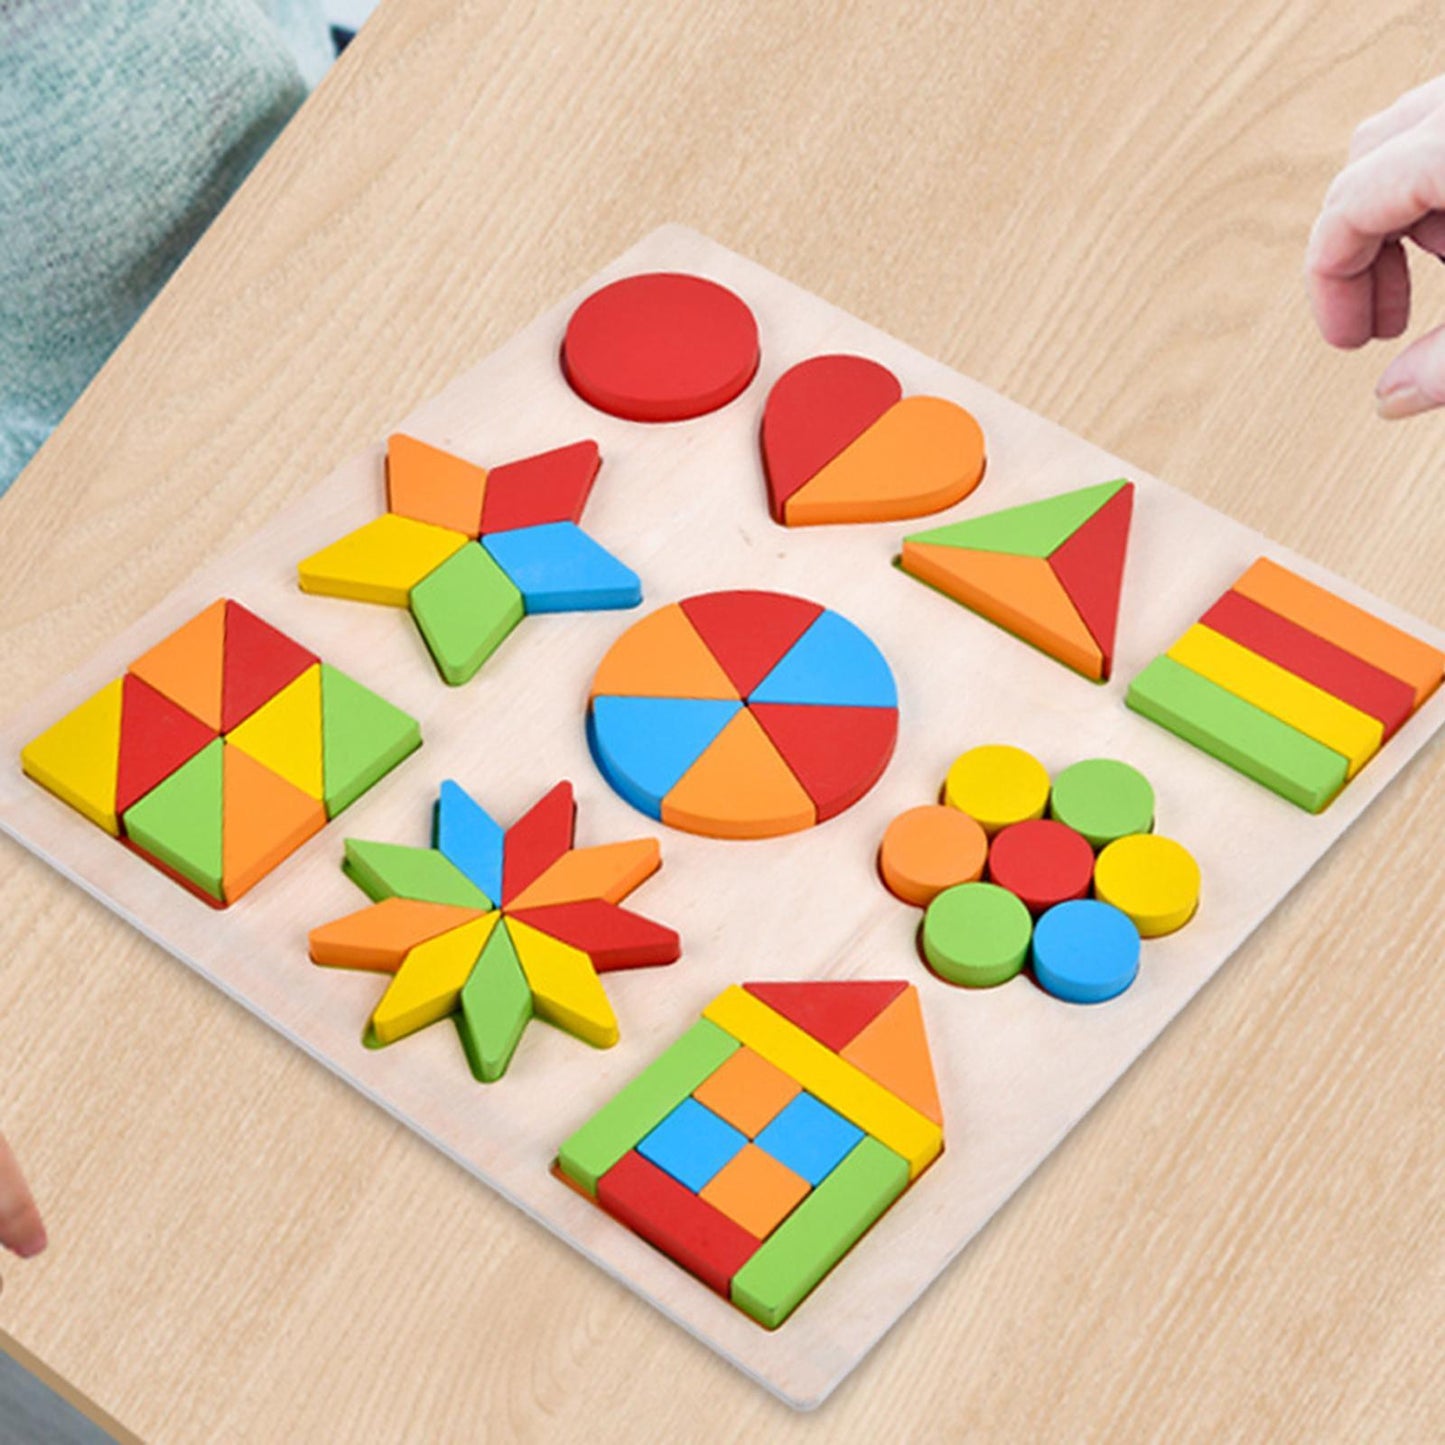 Wooden Colorful Jigsaw Shape Puzzle Board